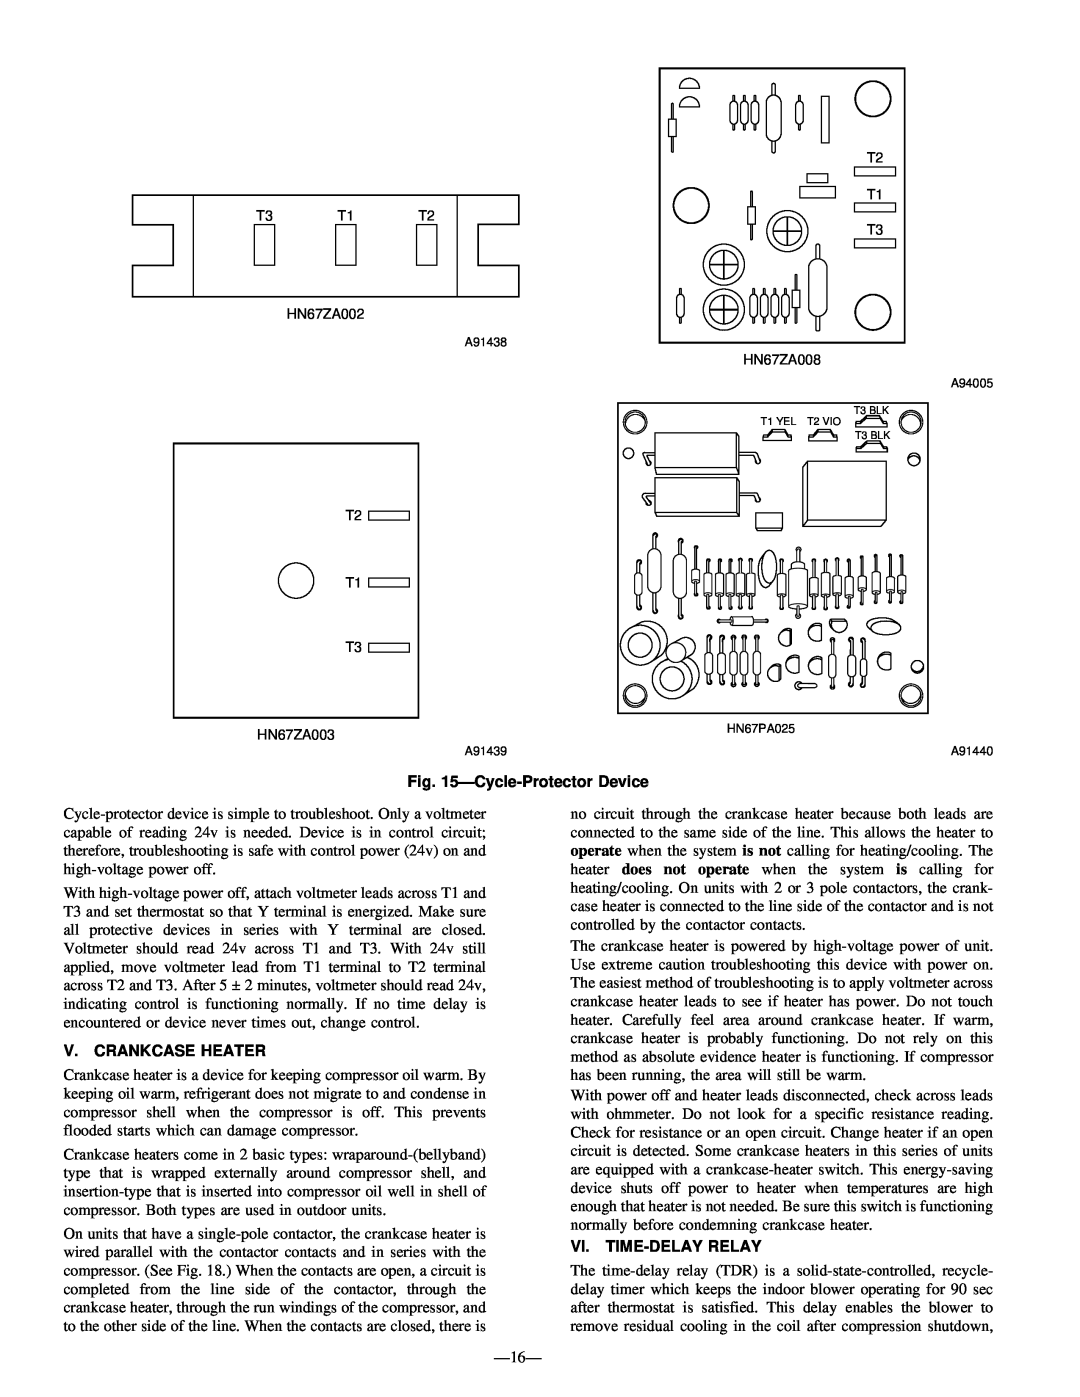 Bryant R-22 service manual Cycle-ProtectorDevice, V. Crankcase Heater, Vi. Time-Delayrelay 